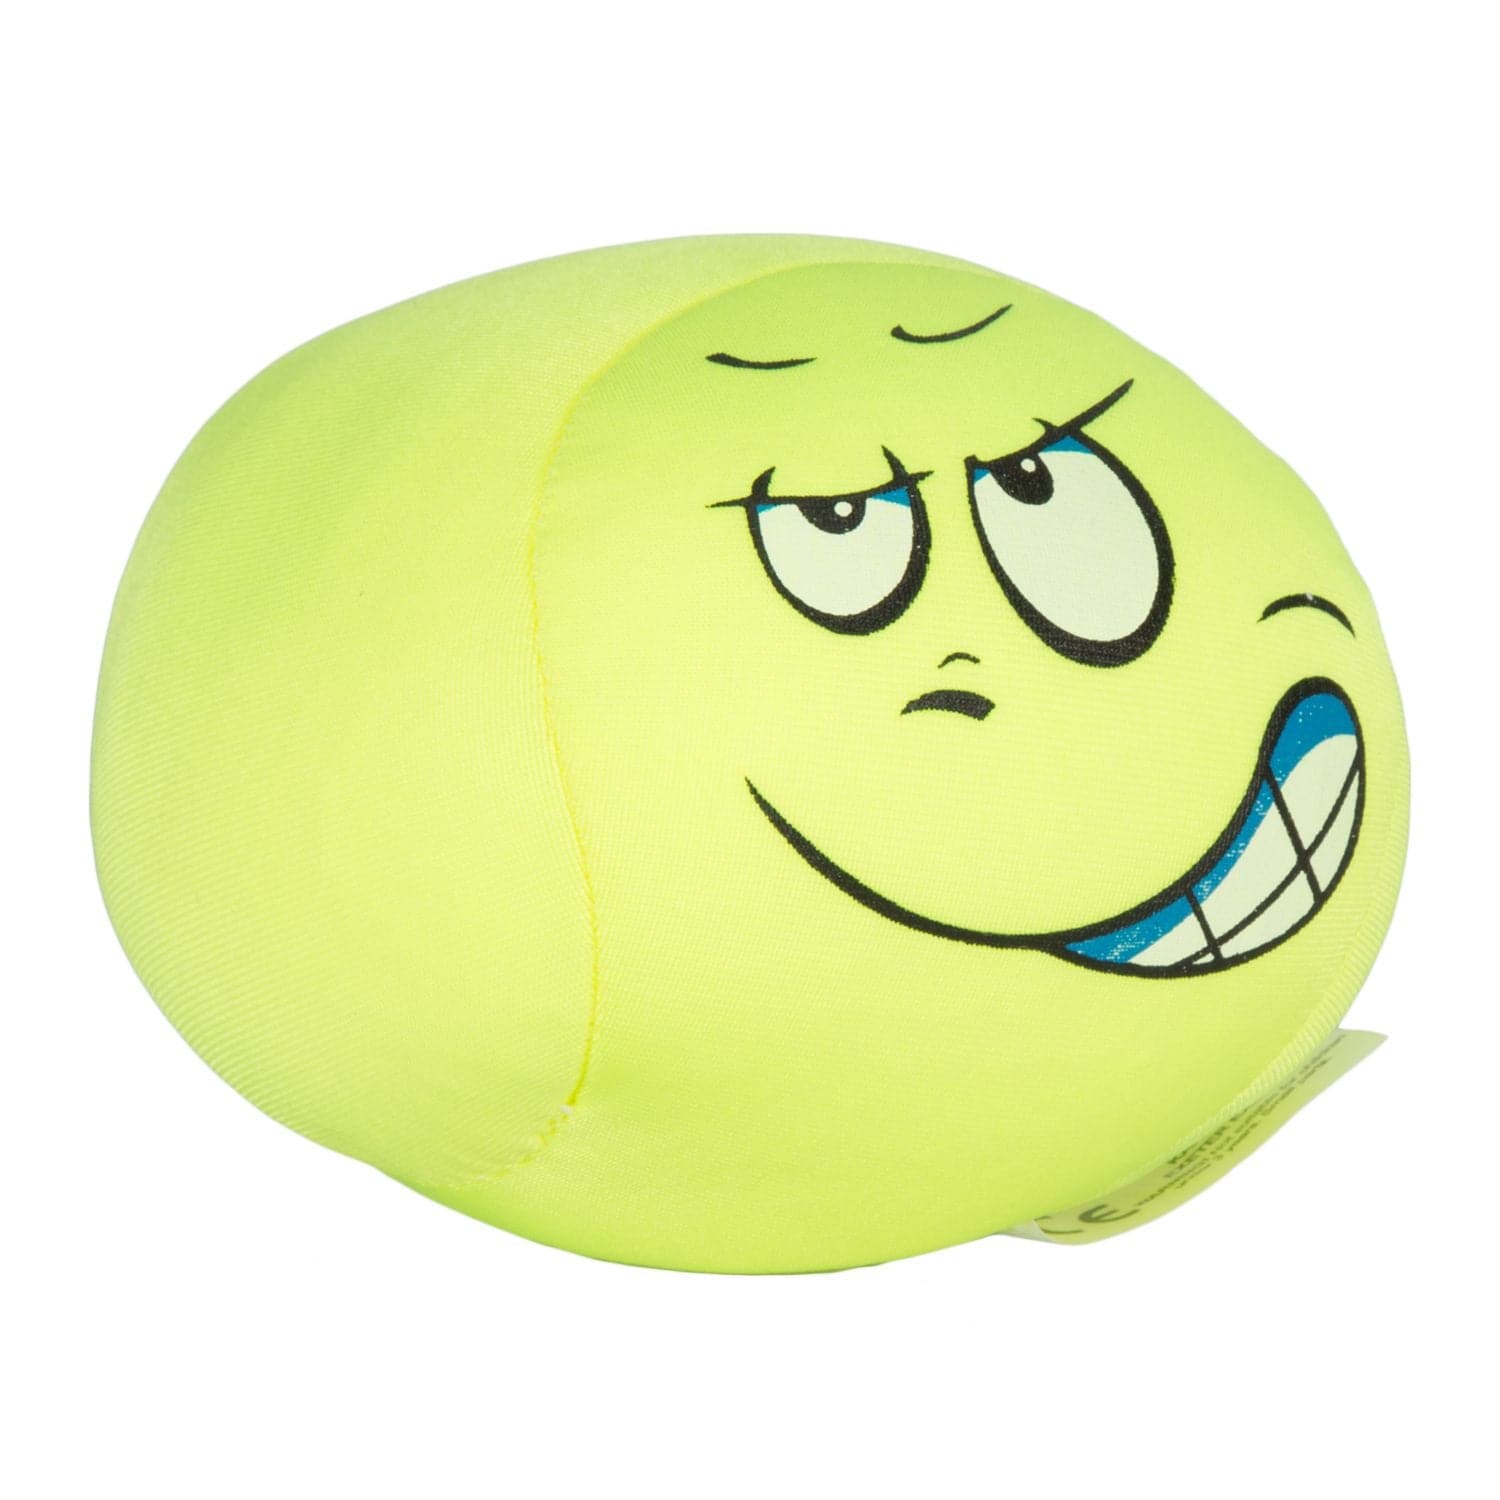 Squeezy Face Ball, Introducing the ultimate source of endless fun - the sensational Squeezy Face Ball! Get ready to experience pure joy with this vibrant ball that comes in a variety of colors and faces, ensuring you have the perfect expression for every occasion.Not only is this ball visually captivating, but it also serves multiple purposes. Need to relieve some stress after a long day? Simply give it a little squeeze and feel your worries melt away. Want to add some excitement to a gathering? Just toss i